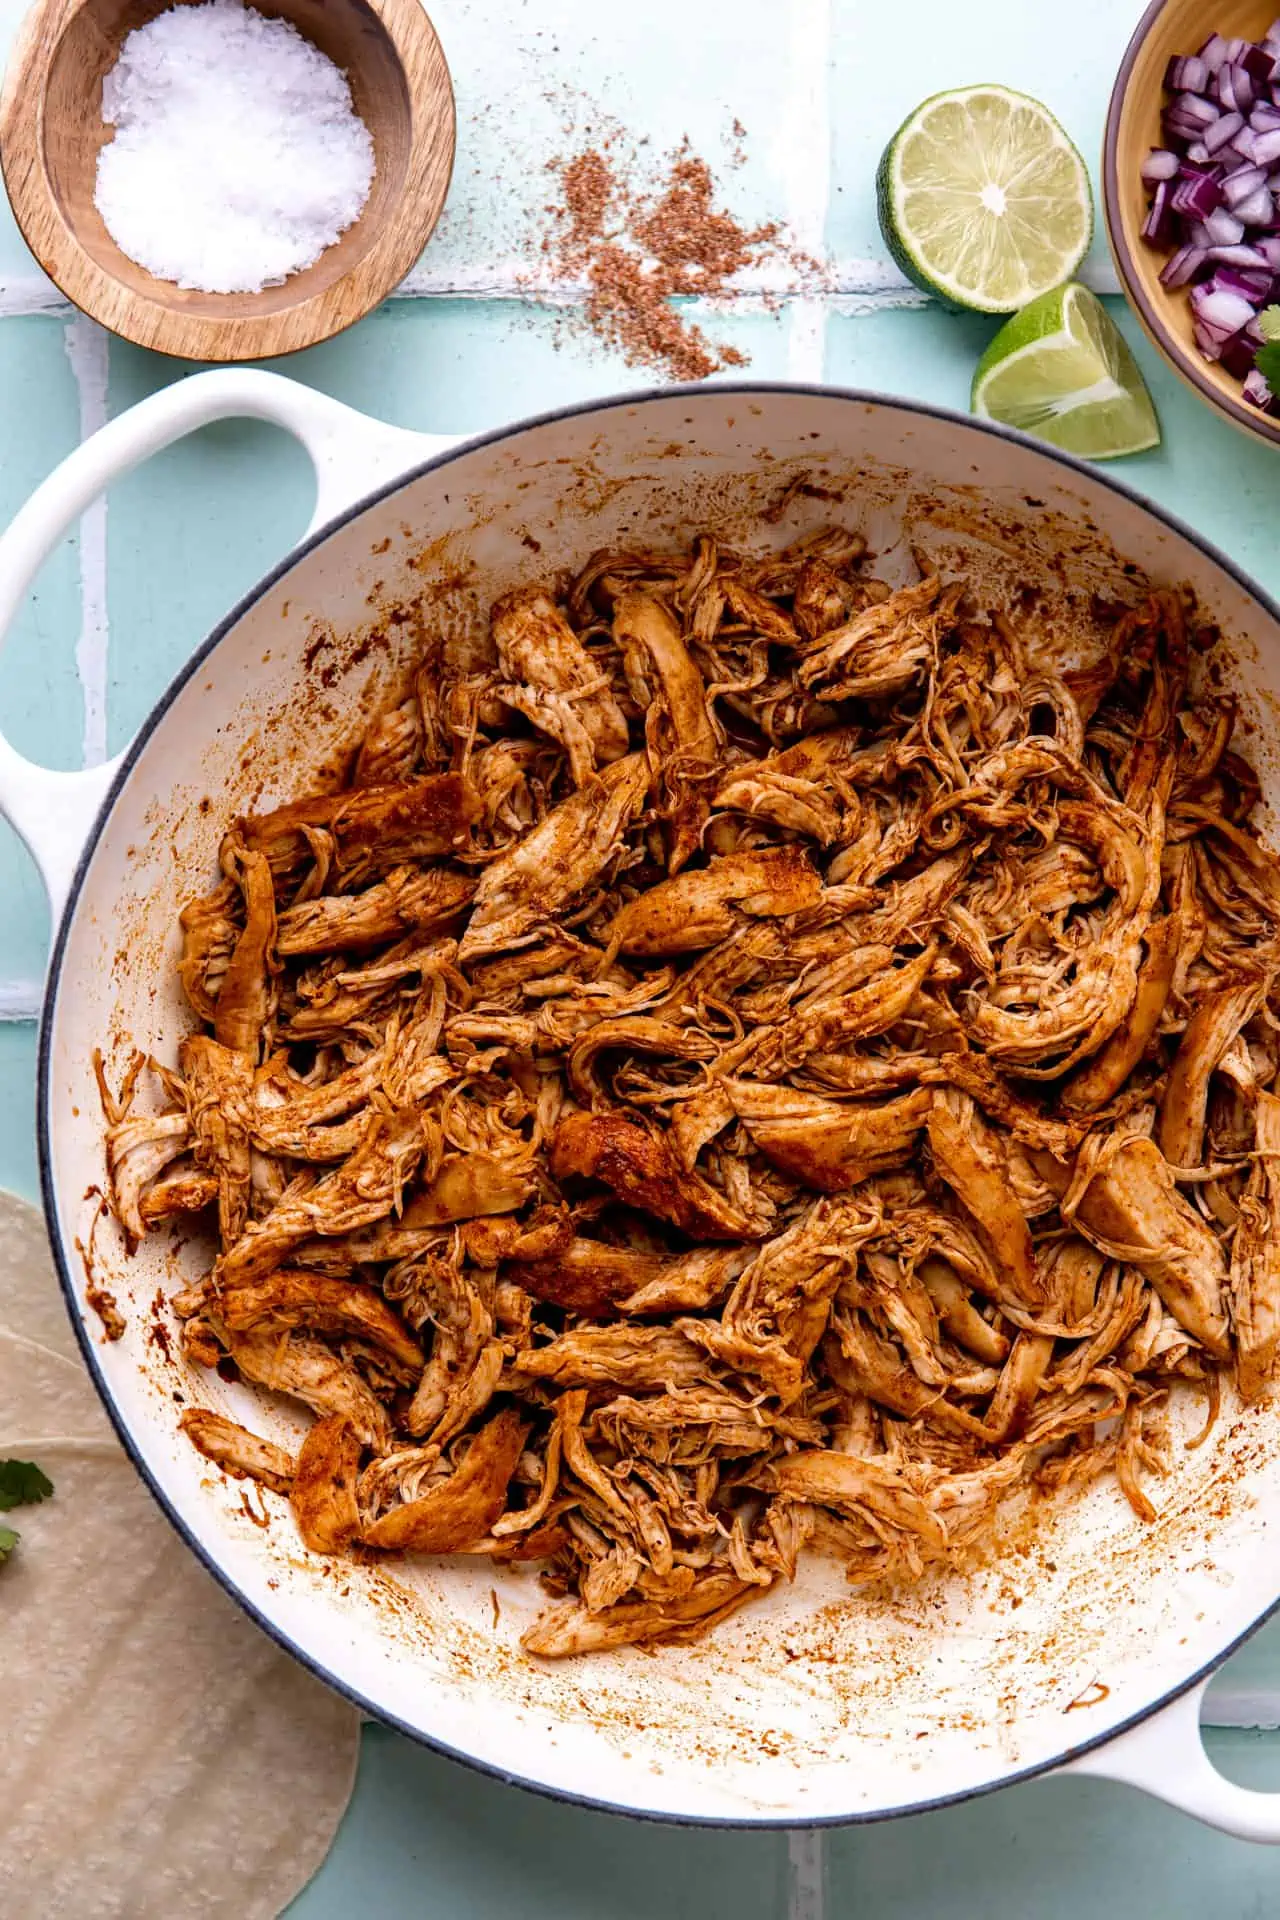 Skillet filled with shredded Mexican style chicken.